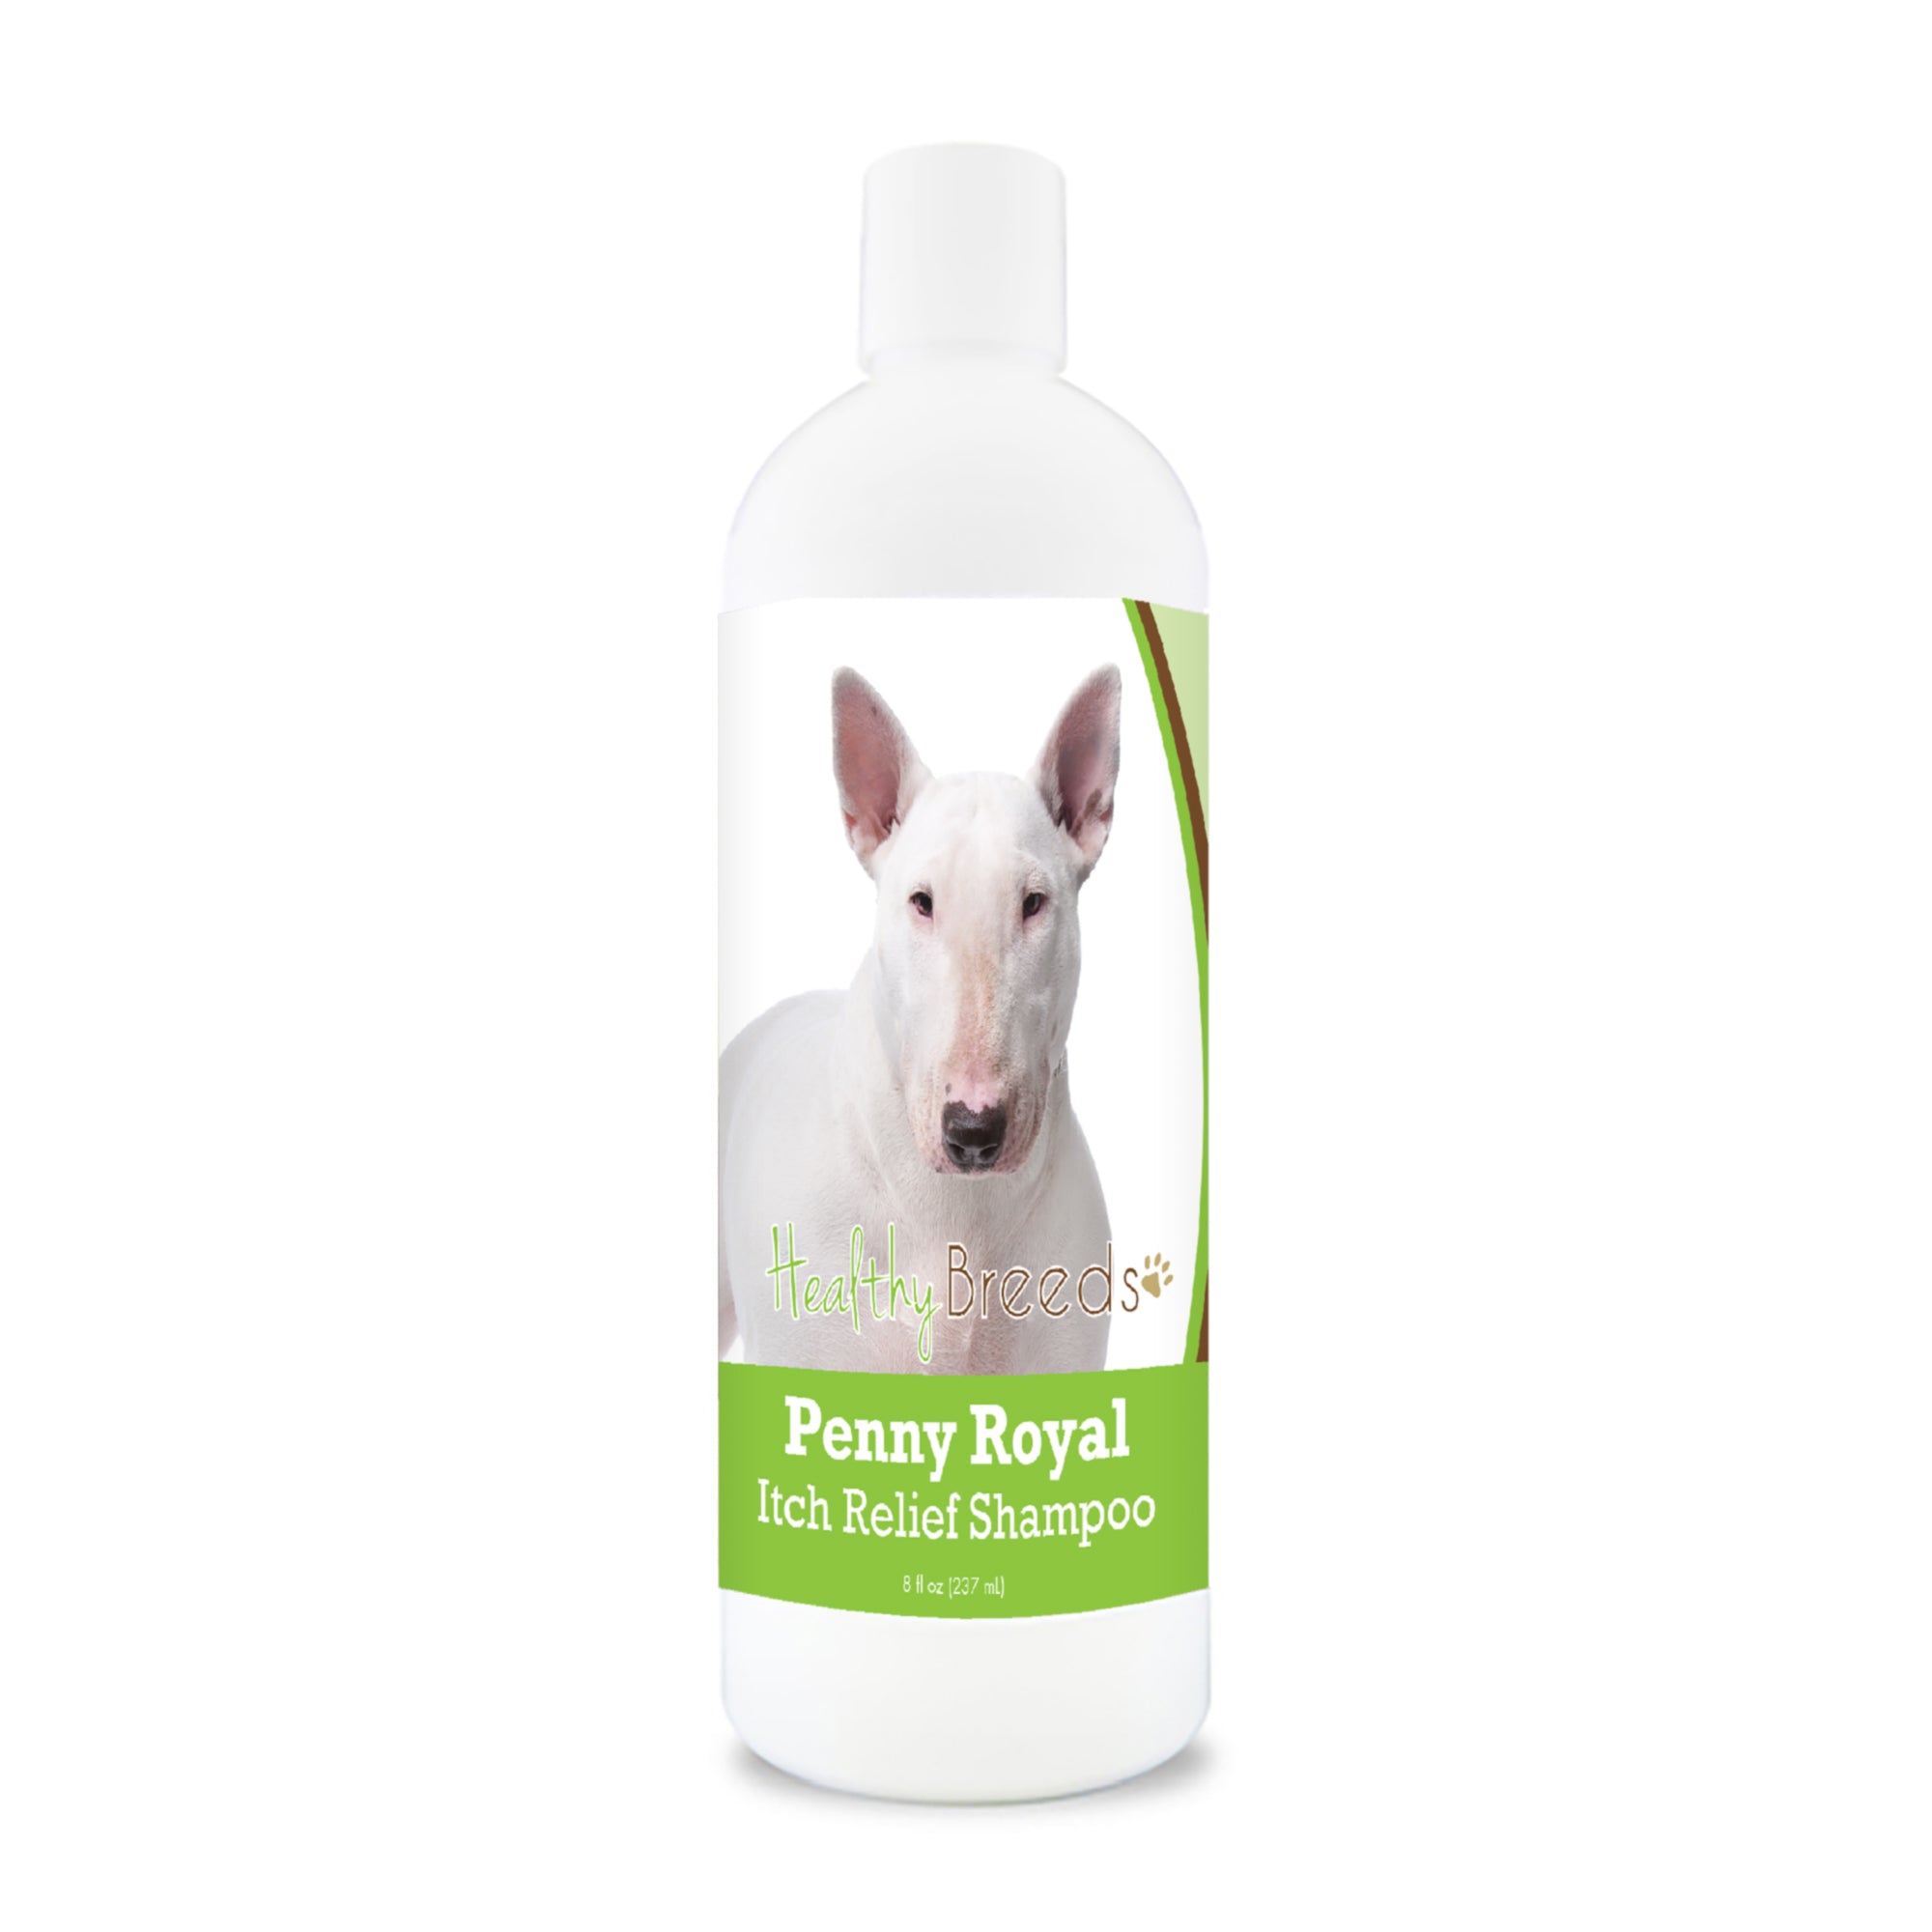 Bull Terrier Penny Royal Itch Relief Shampoo 8 oz